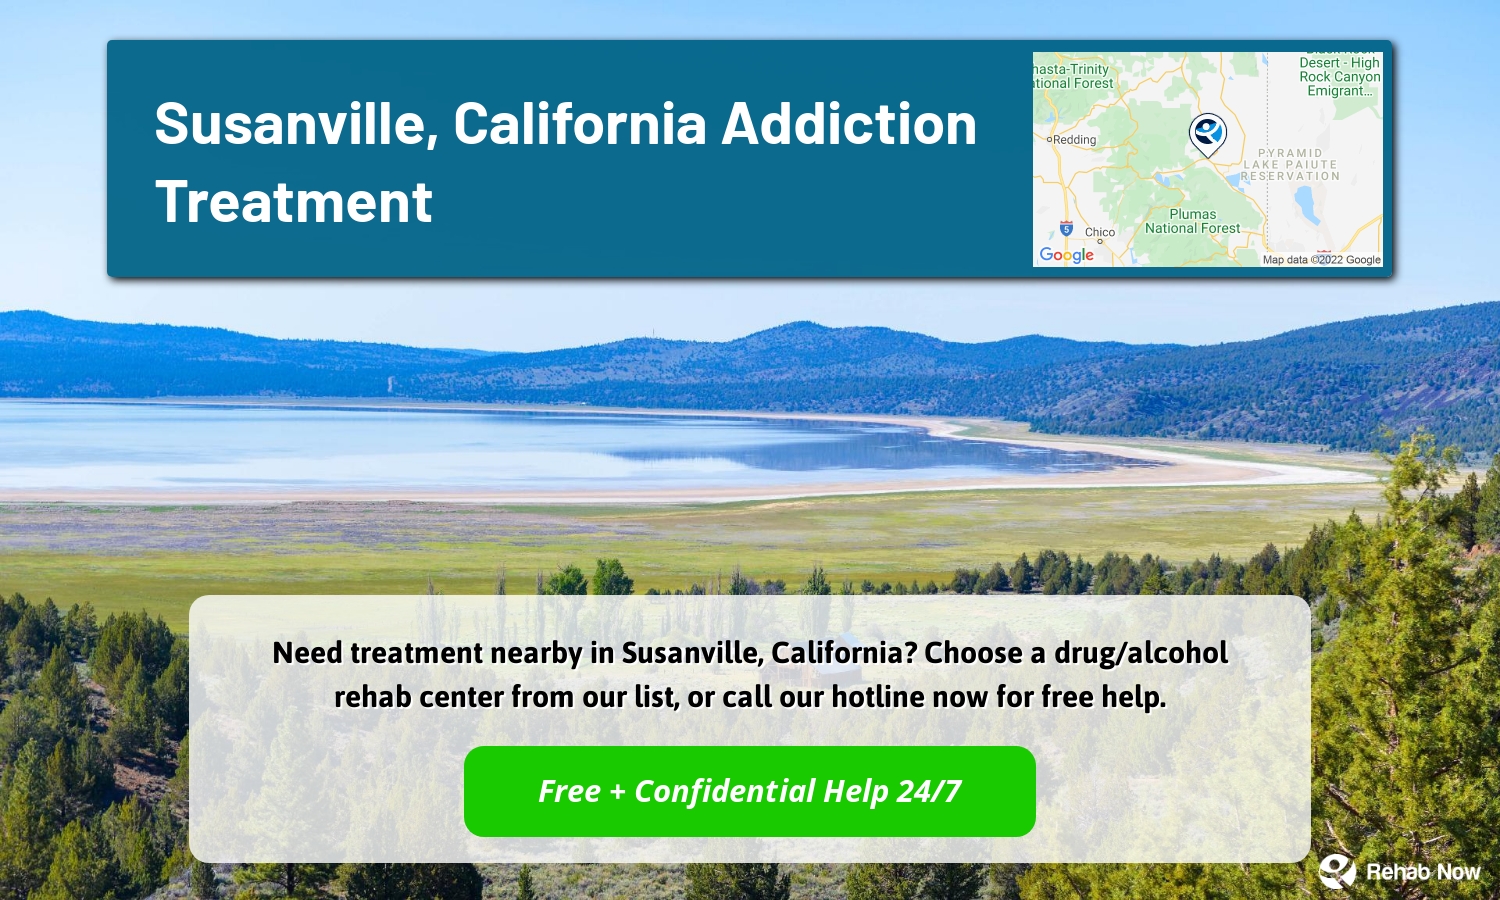 Need treatment nearby in Susanville, California? Choose a drug/alcohol rehab center from our list, or call our hotline now for free help.